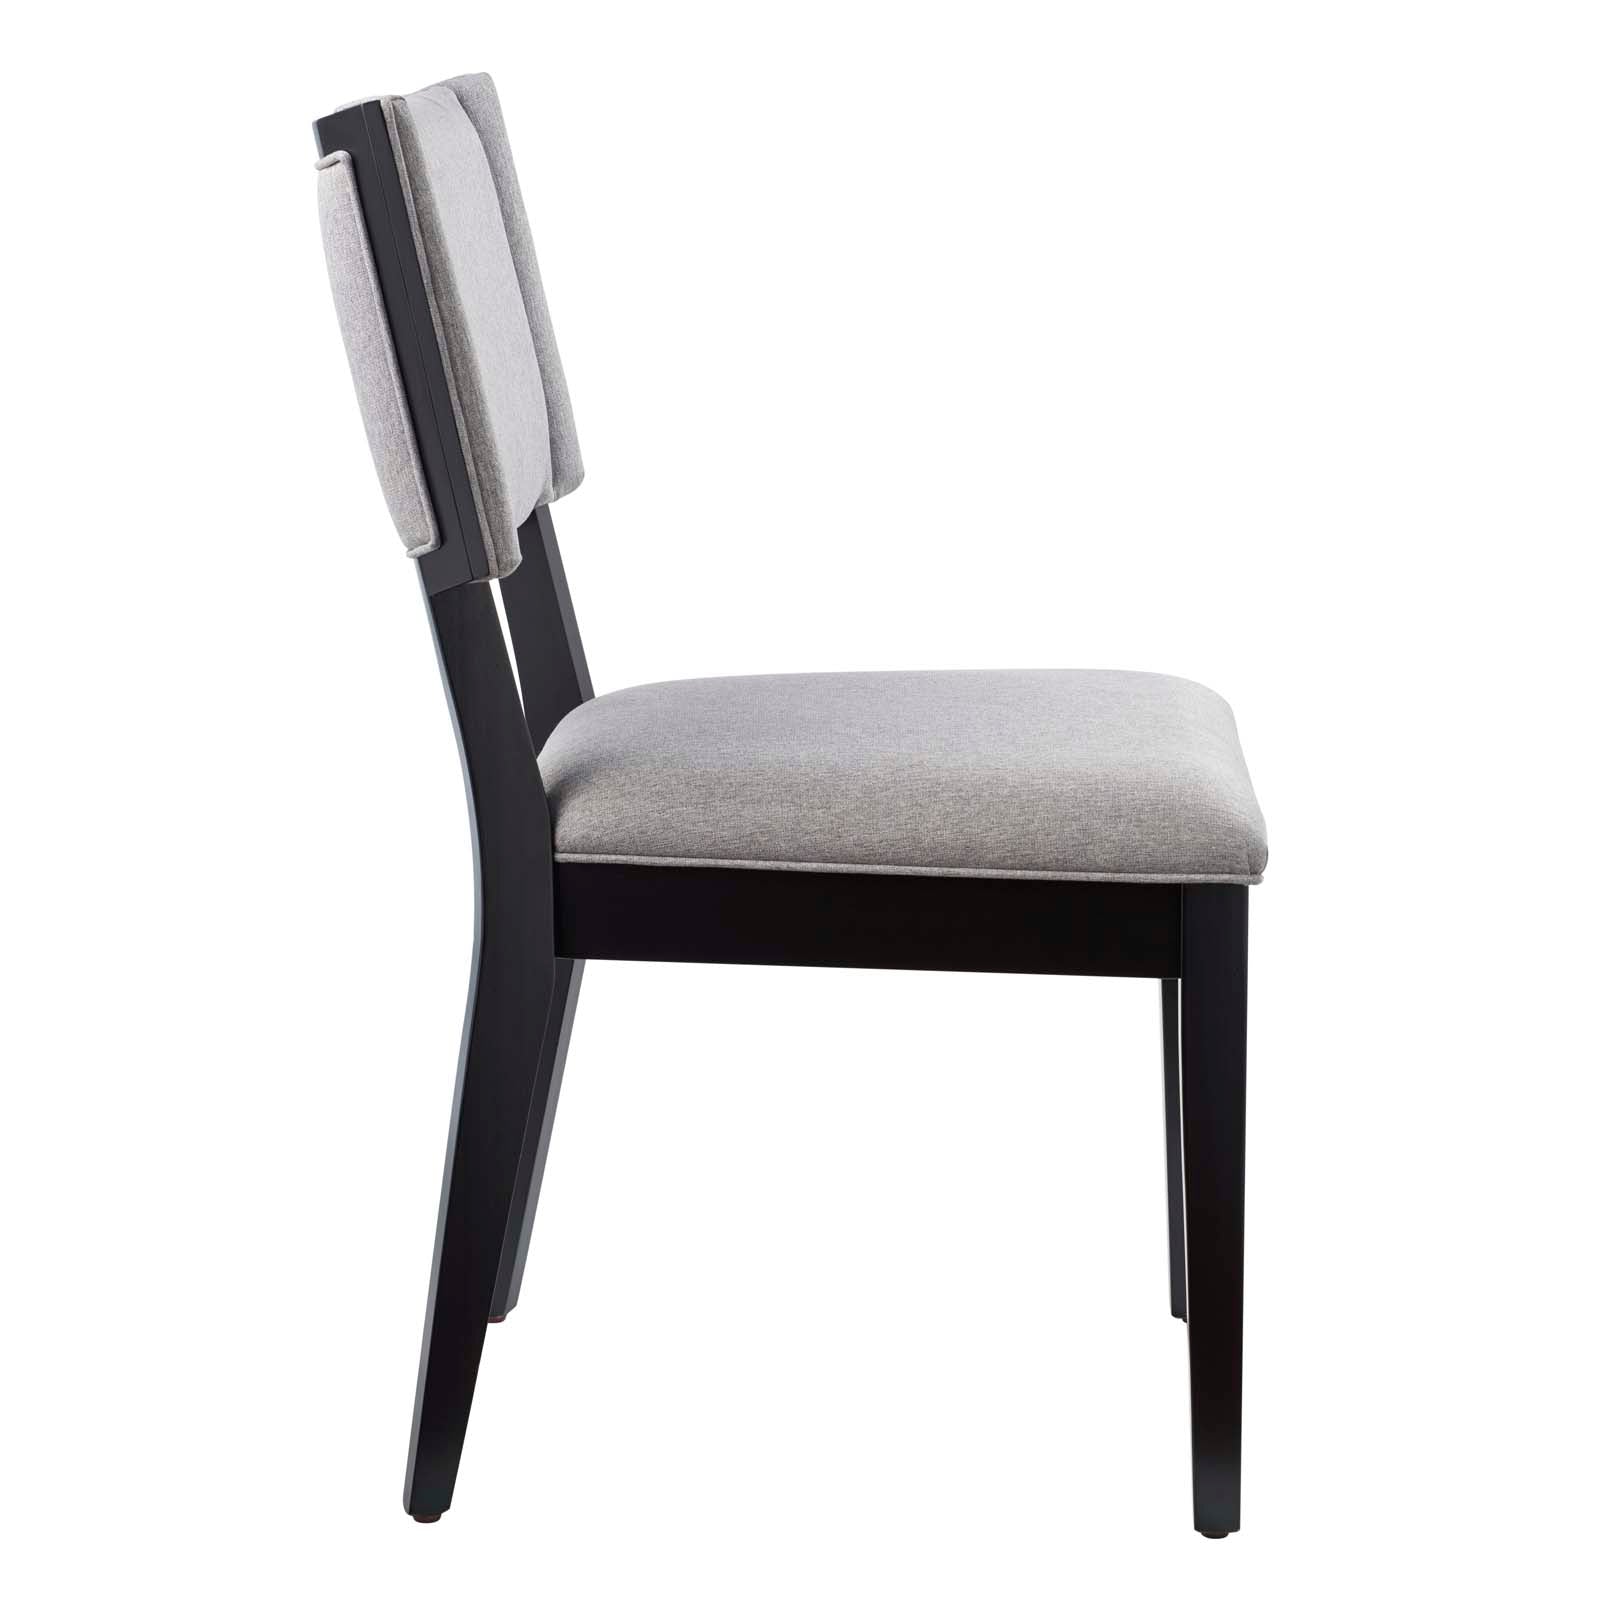 Esquire Dining Chairs - Set of 2 - East Shore Modern Home Furnishings